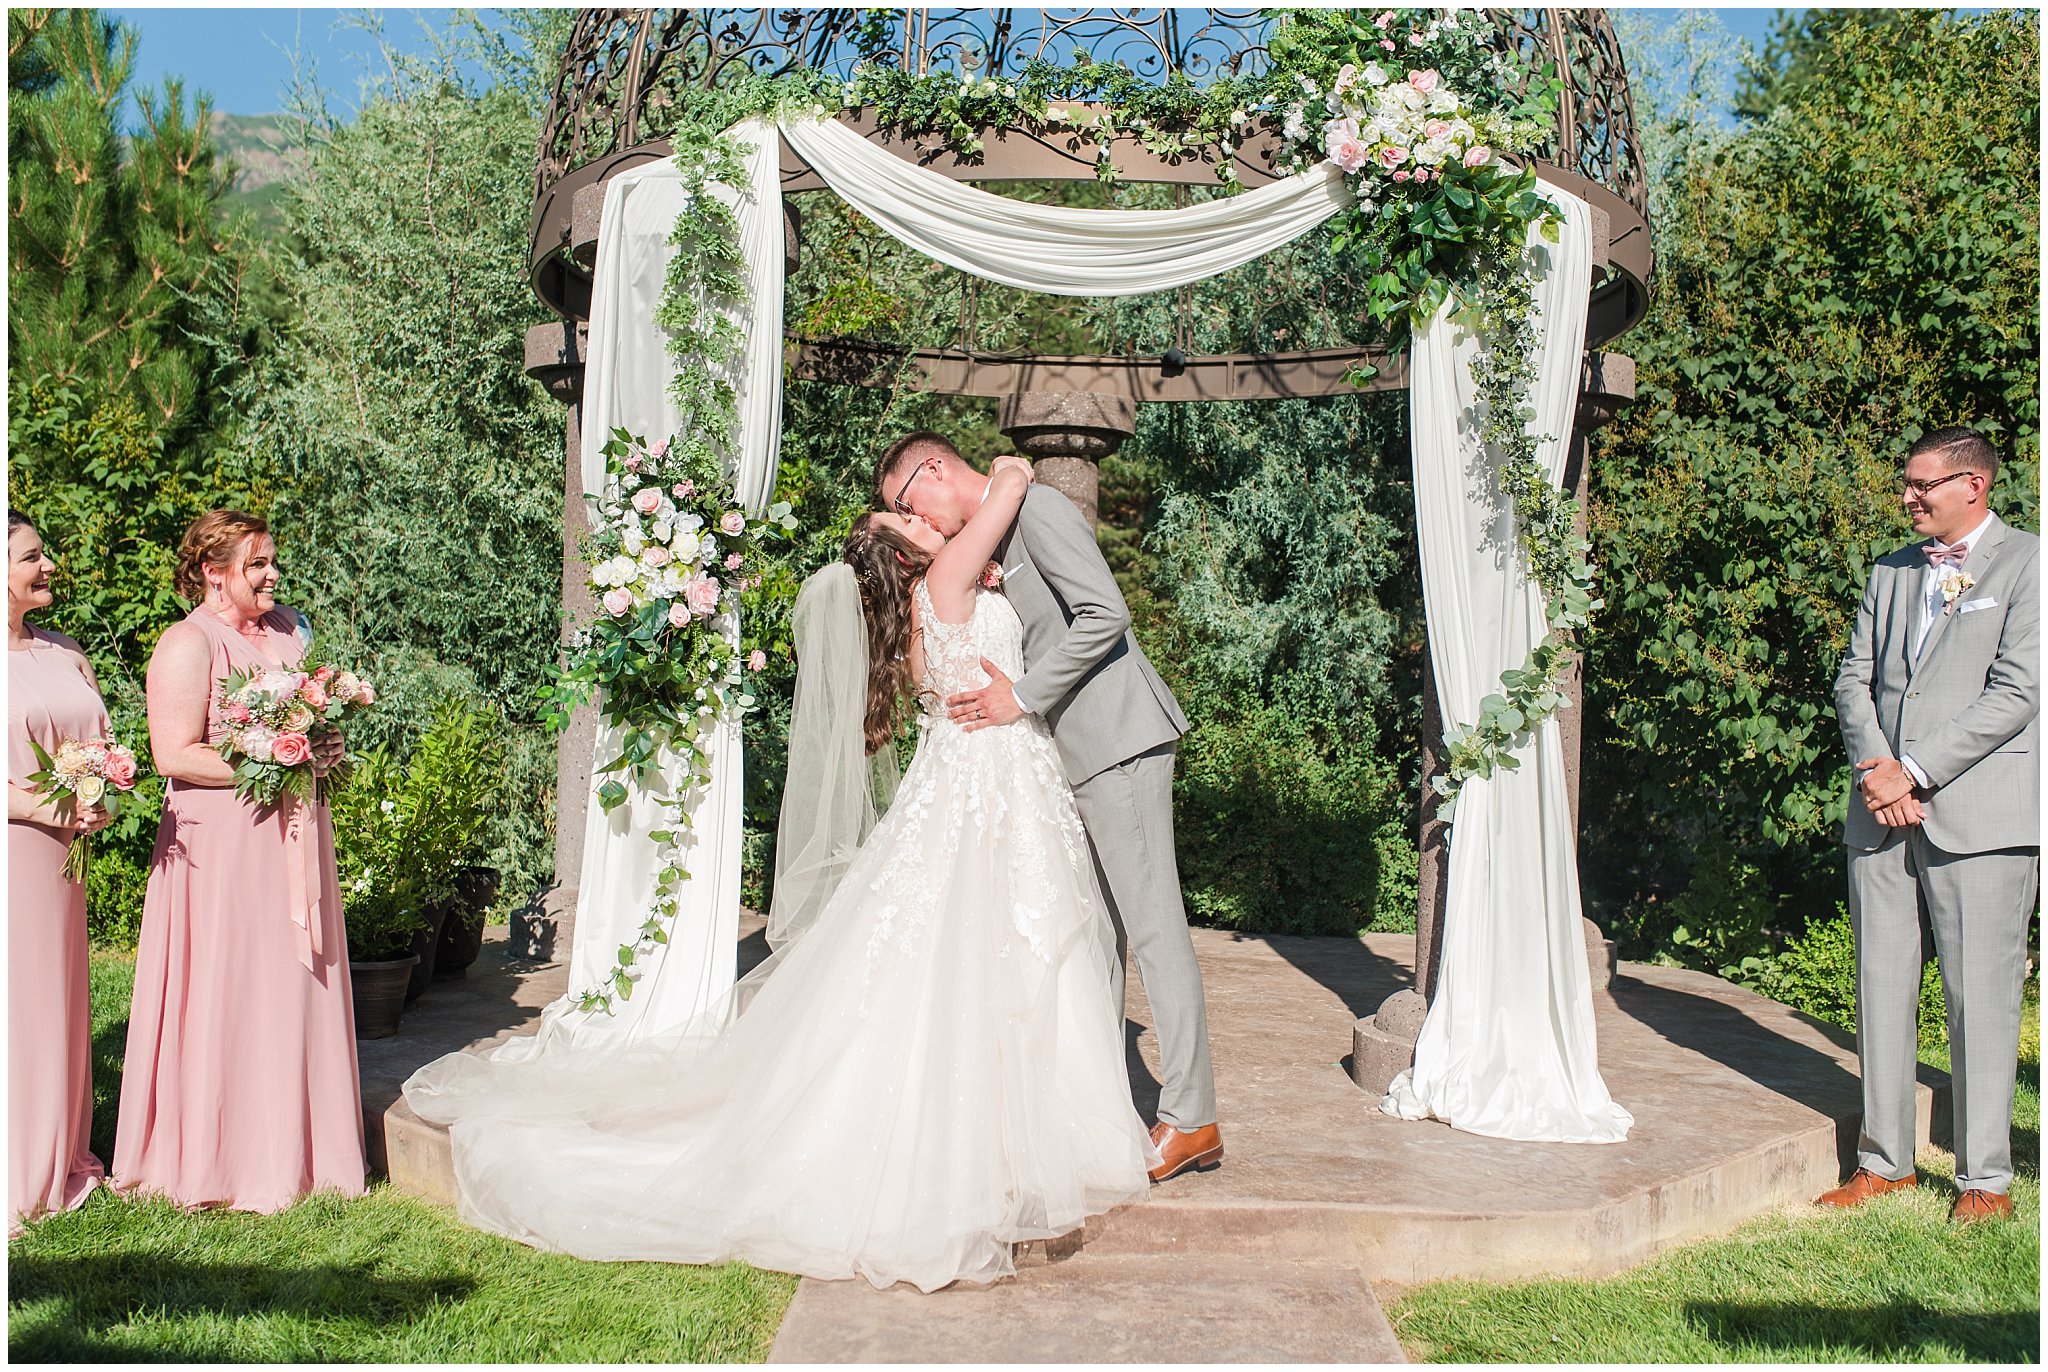 First kiss at ceremony | Oak Hills Utah Dusty Rose and Gray Summer Wedding | Jessie and Dallin Photography